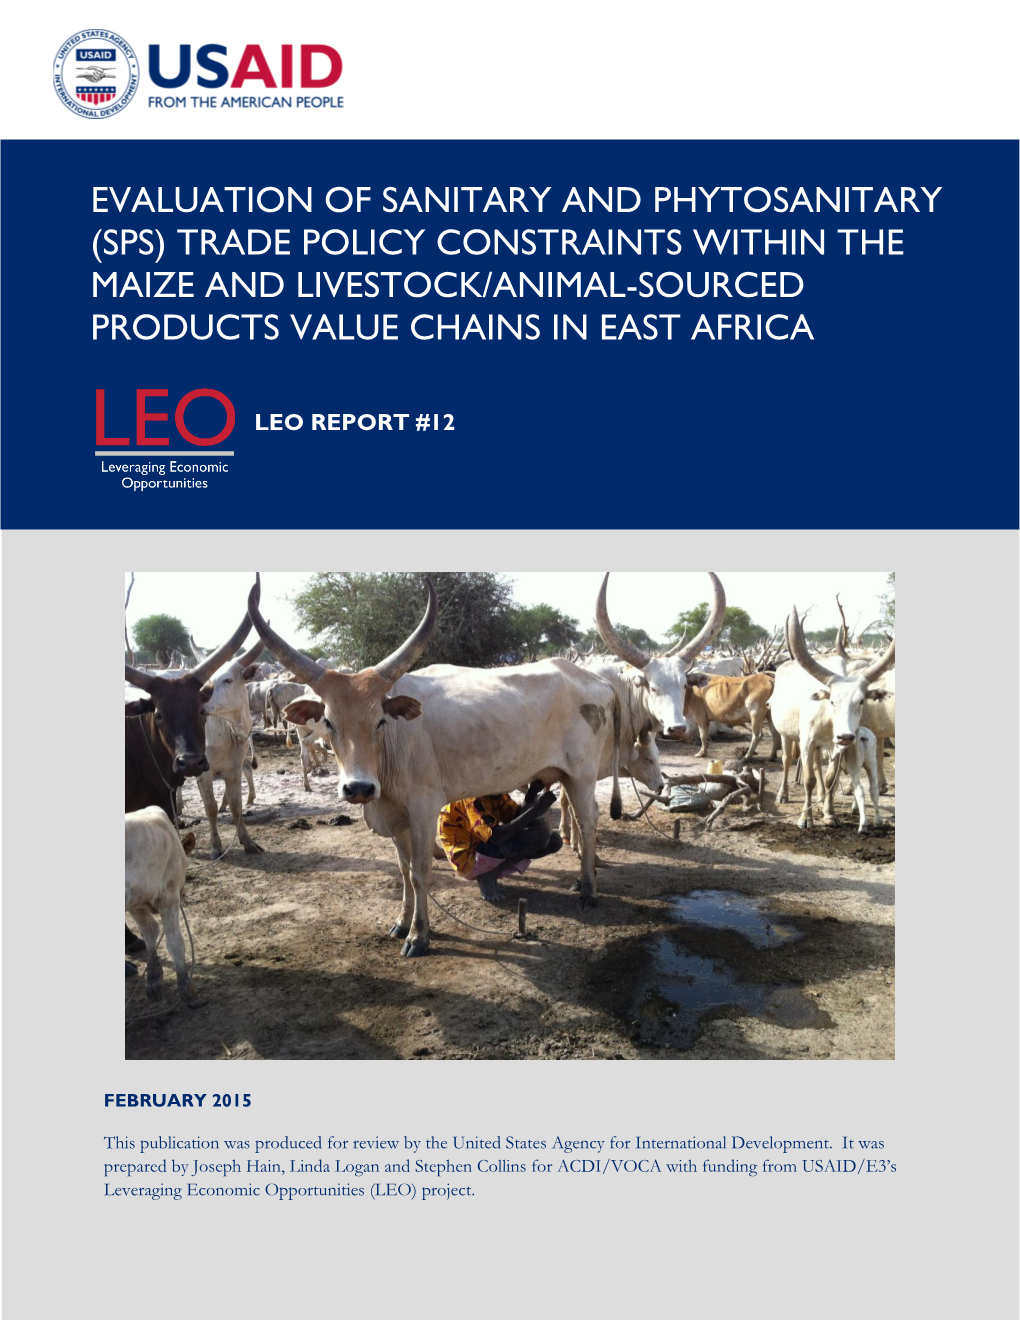 SPS Trade Policy Constraints Within the Maize & Livestock